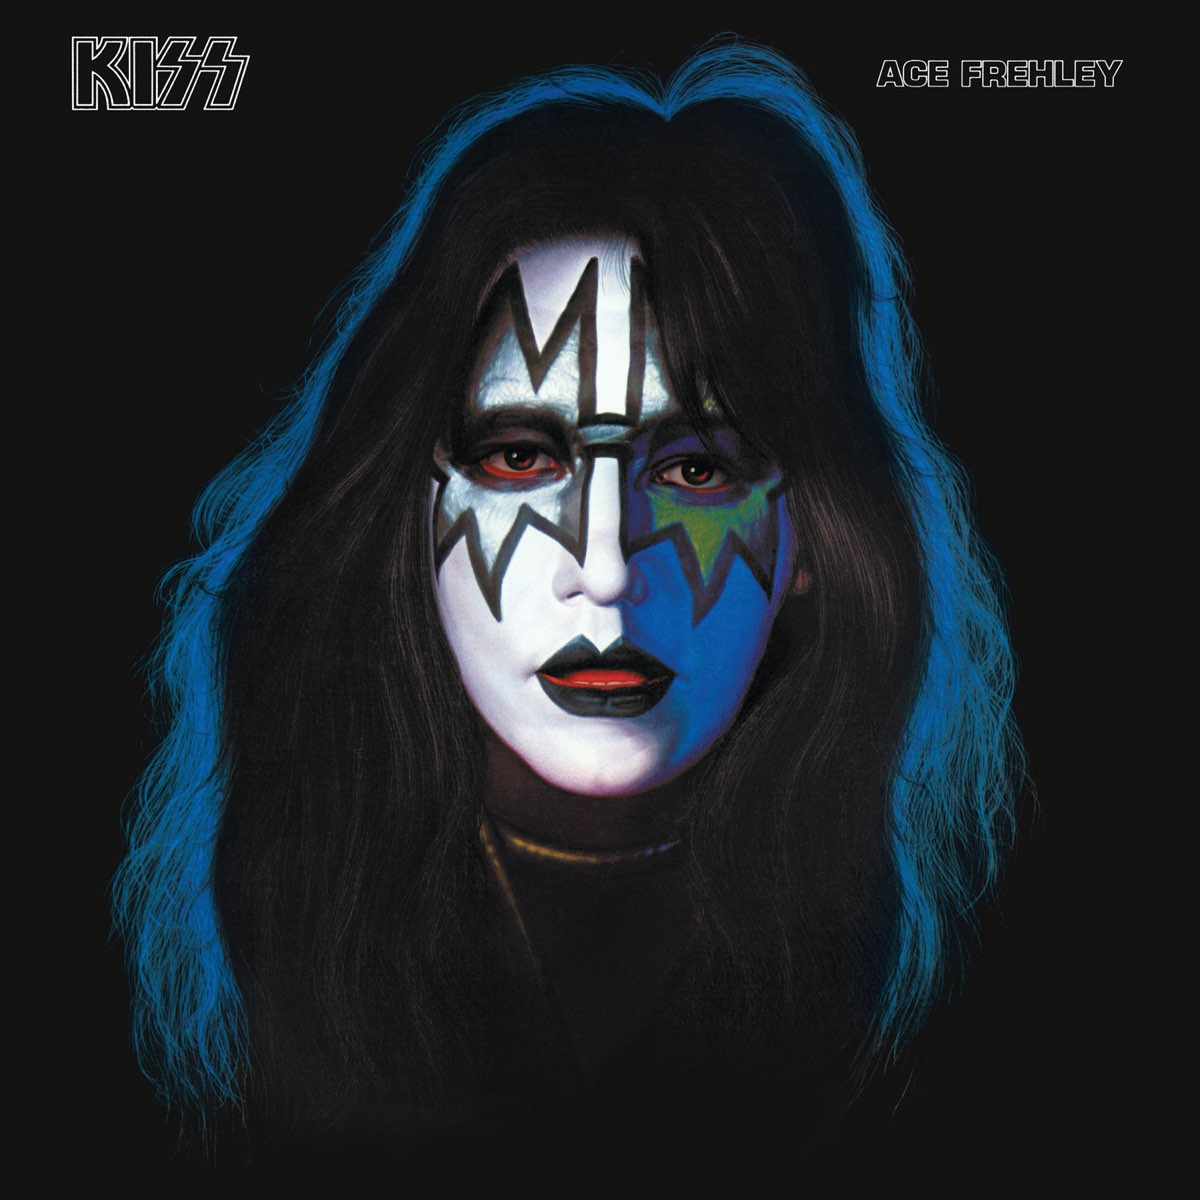 Kiss Ace Frehley By Ace Frehley On Apple Music